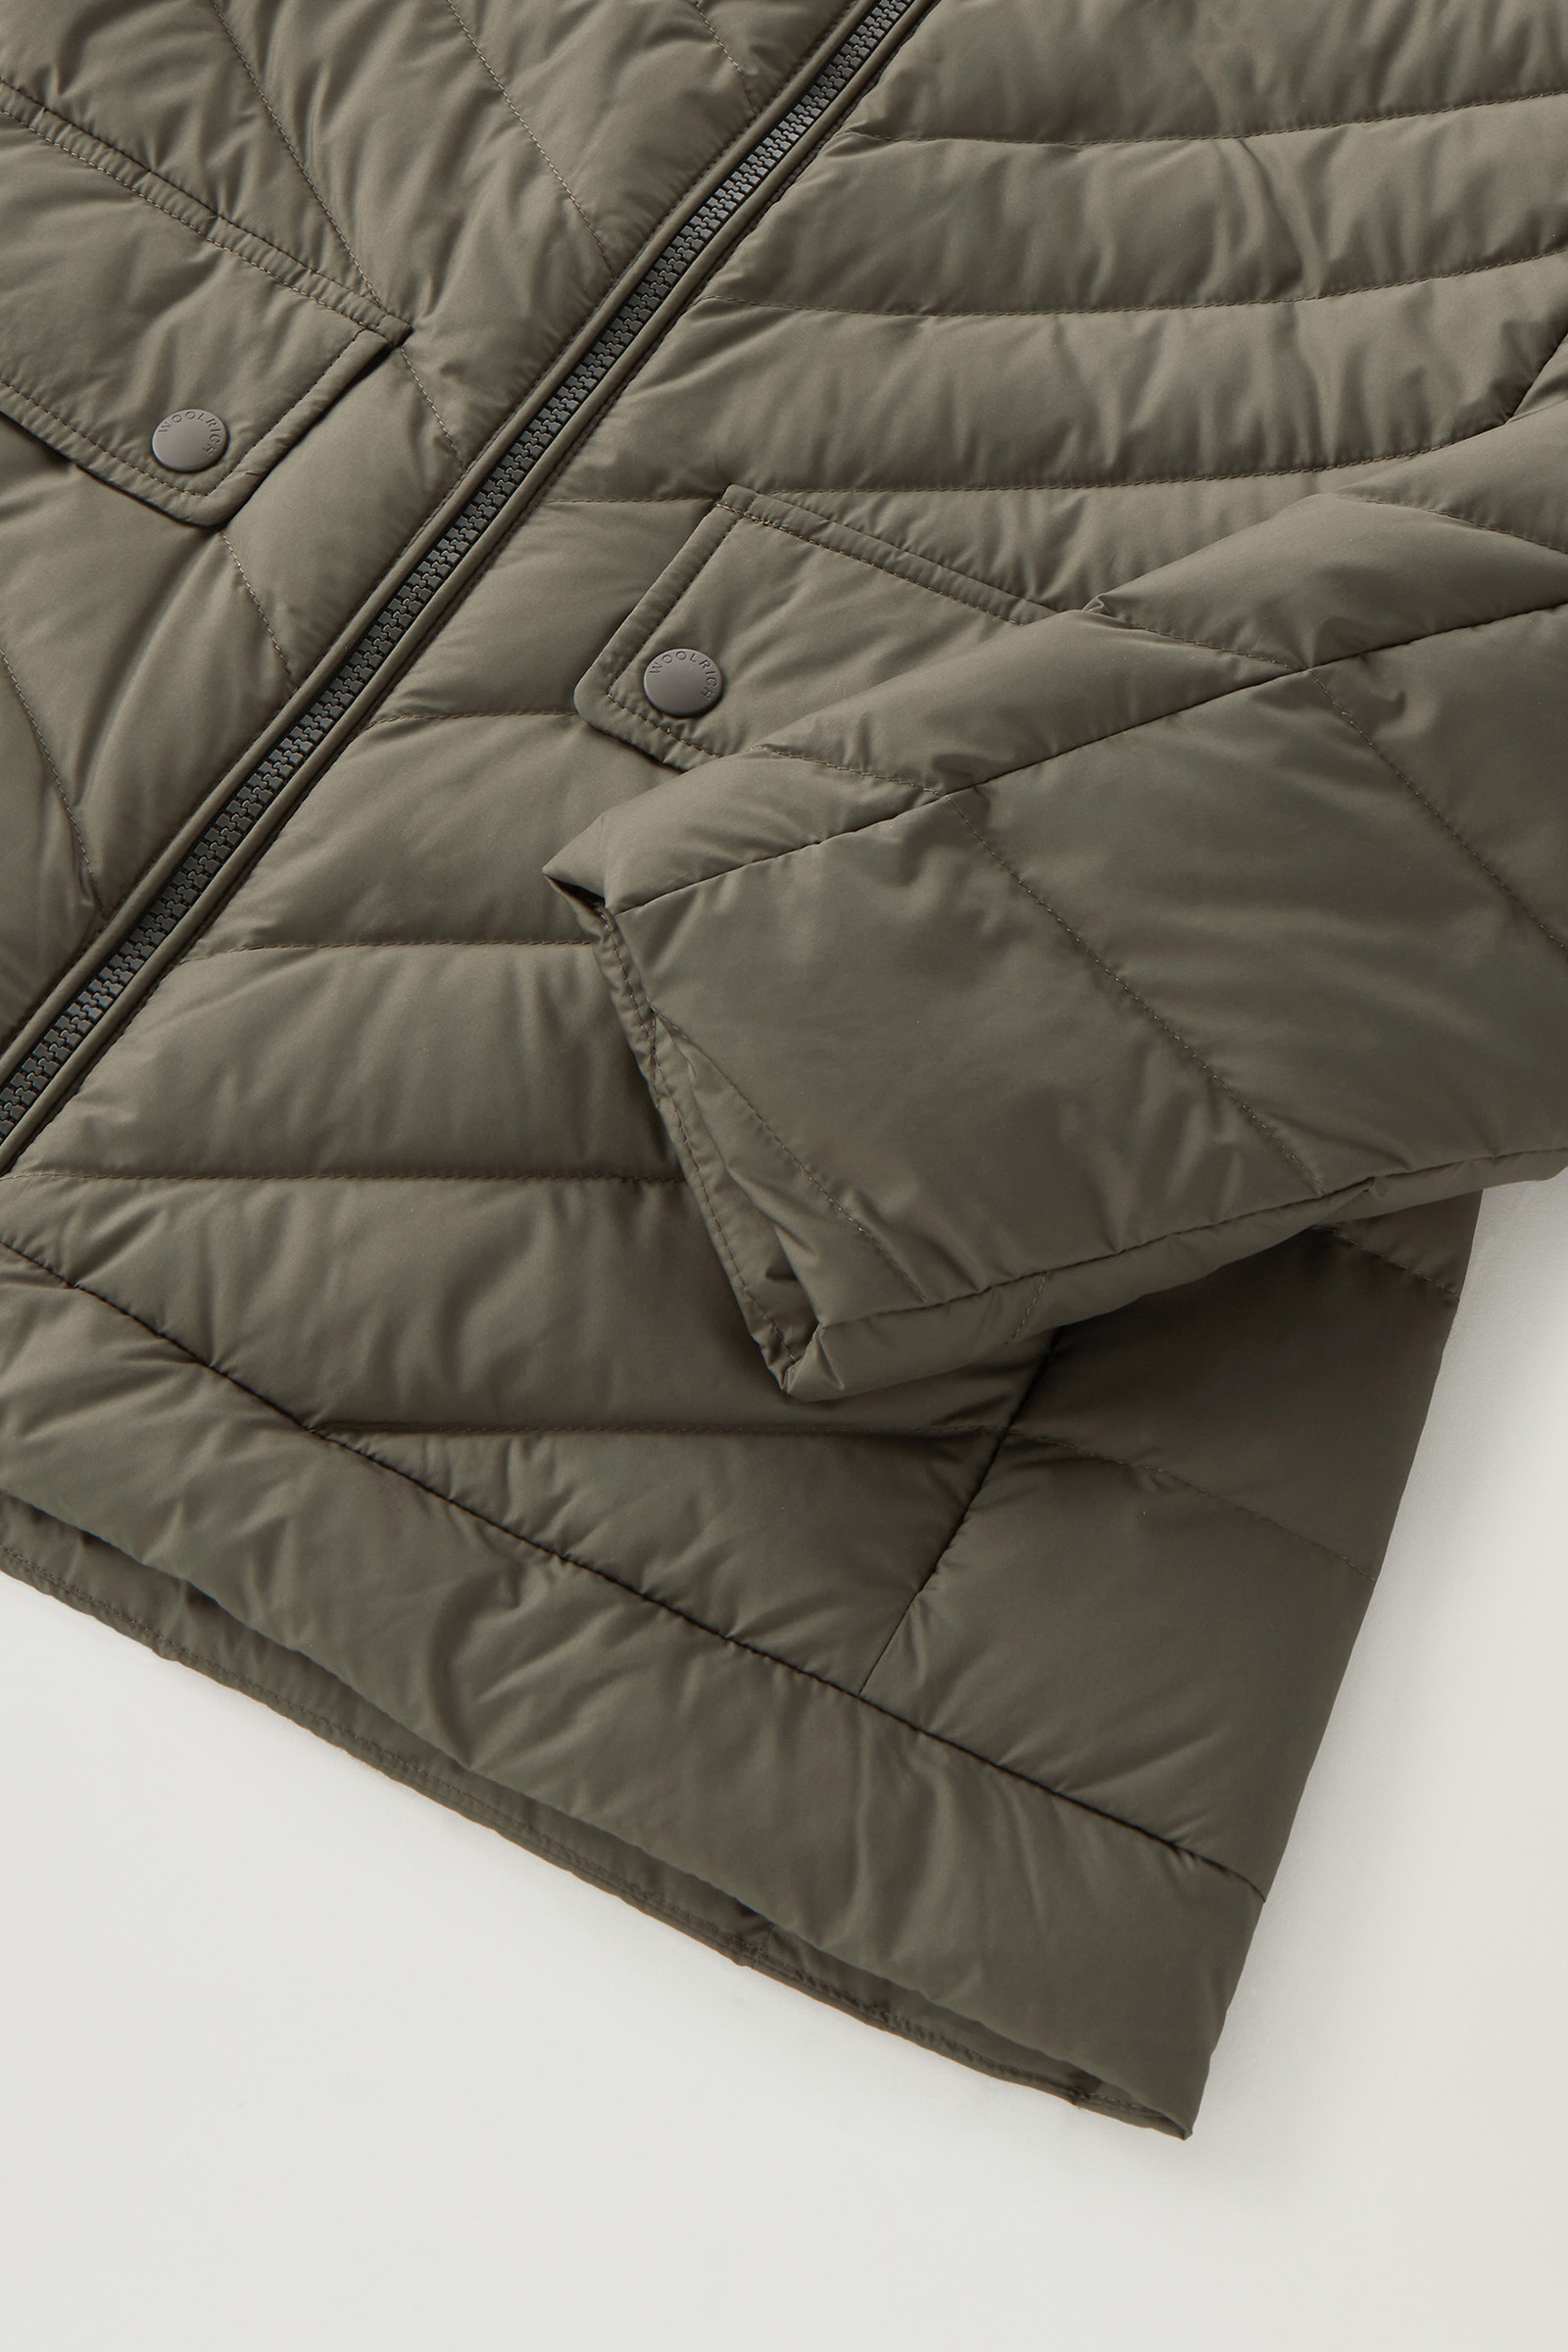 Women's Padded Short Jacket with Chevron Quilting Green | Woolrich USA